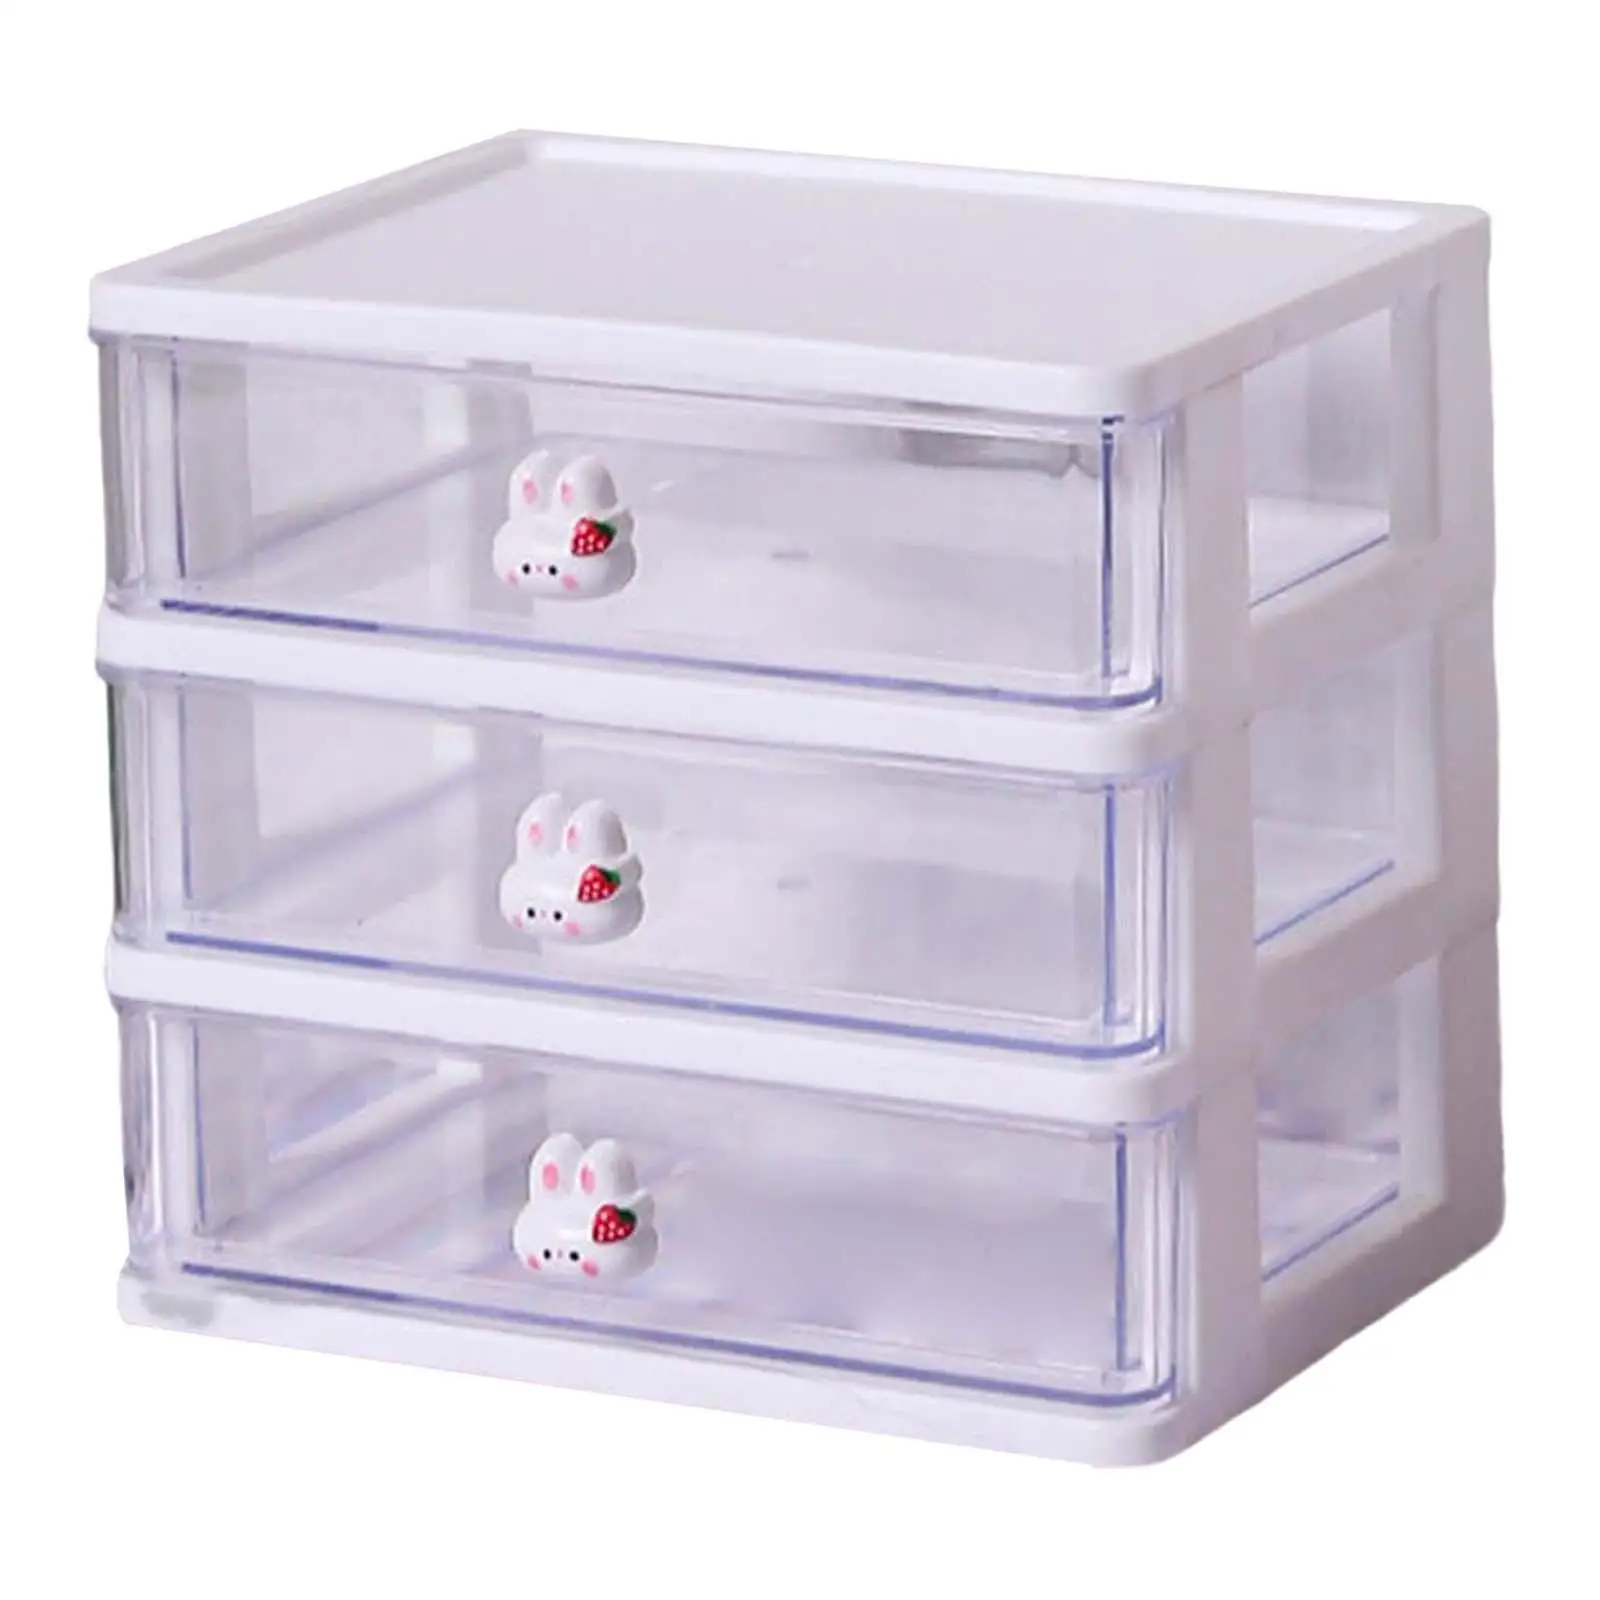 Desk Organizer with Drawer Makeup Holder Storage Drawers Case Cosmetic Organiser Case Tidy for Dressing Table Countertop Dorm